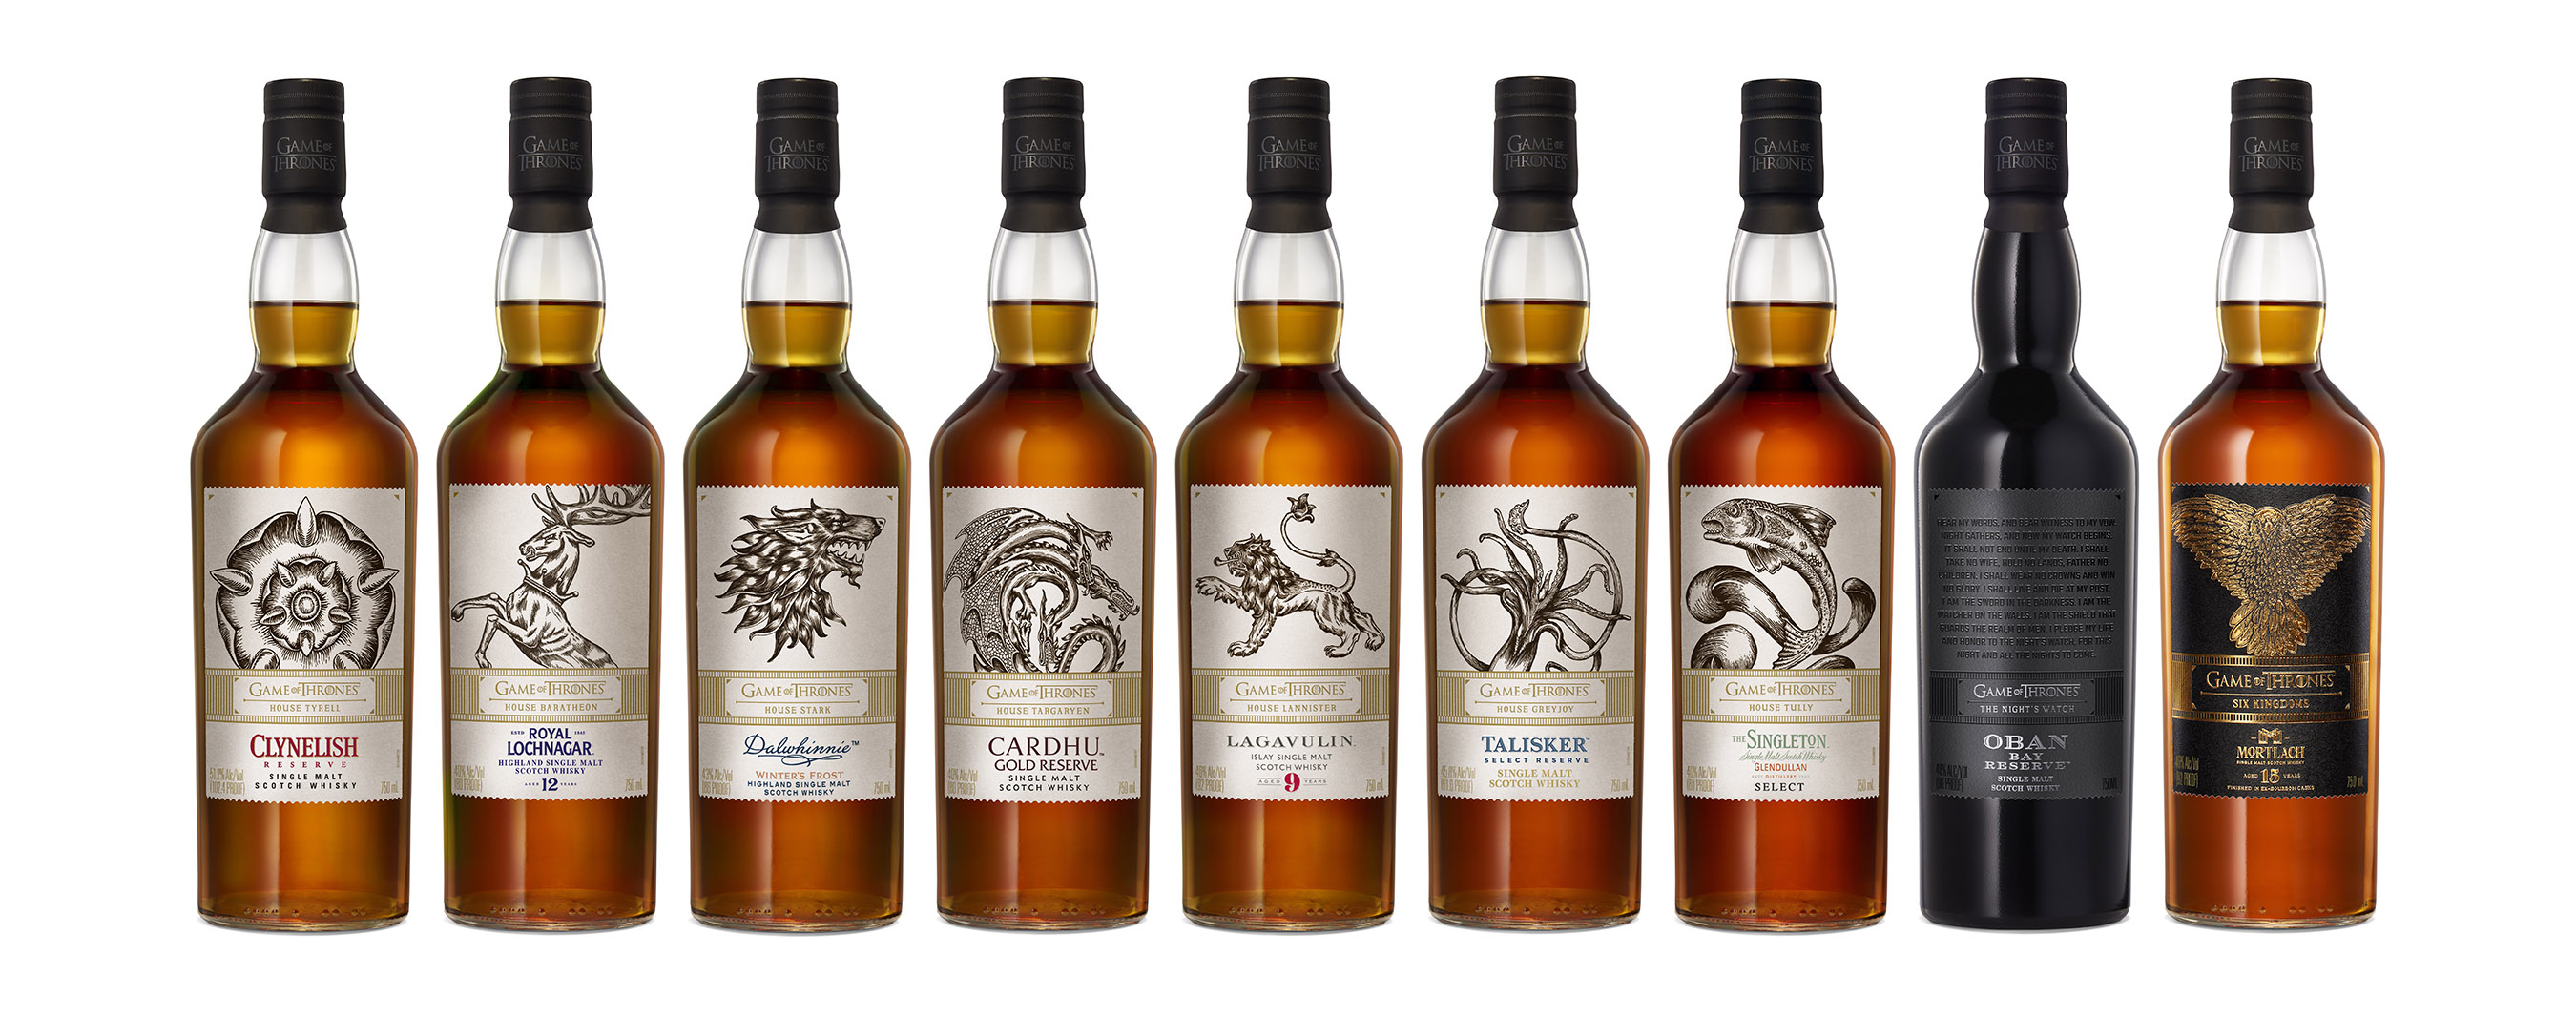 The Game of Thrones Single Malt Scotch Whisky Collection